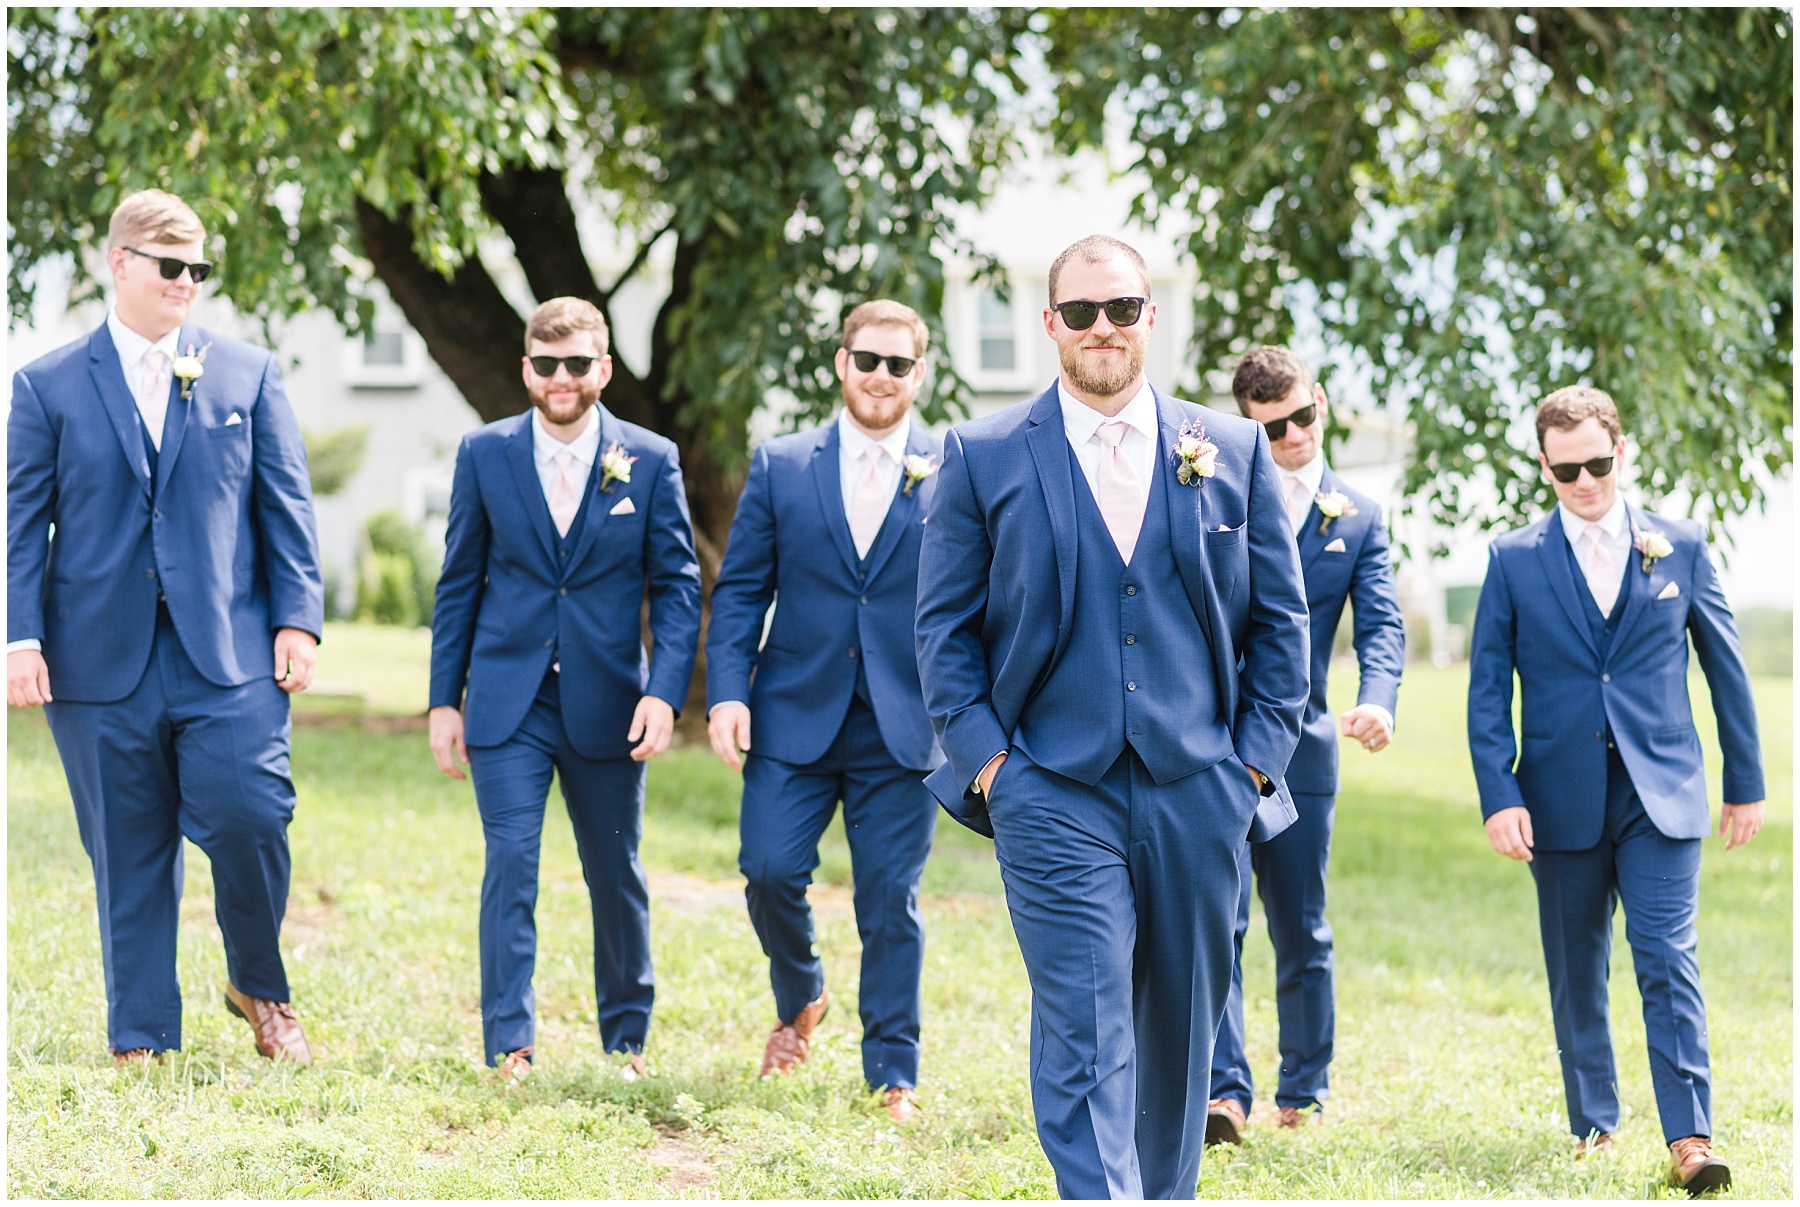 Groom and groomsmen at Allenbrooke Farms